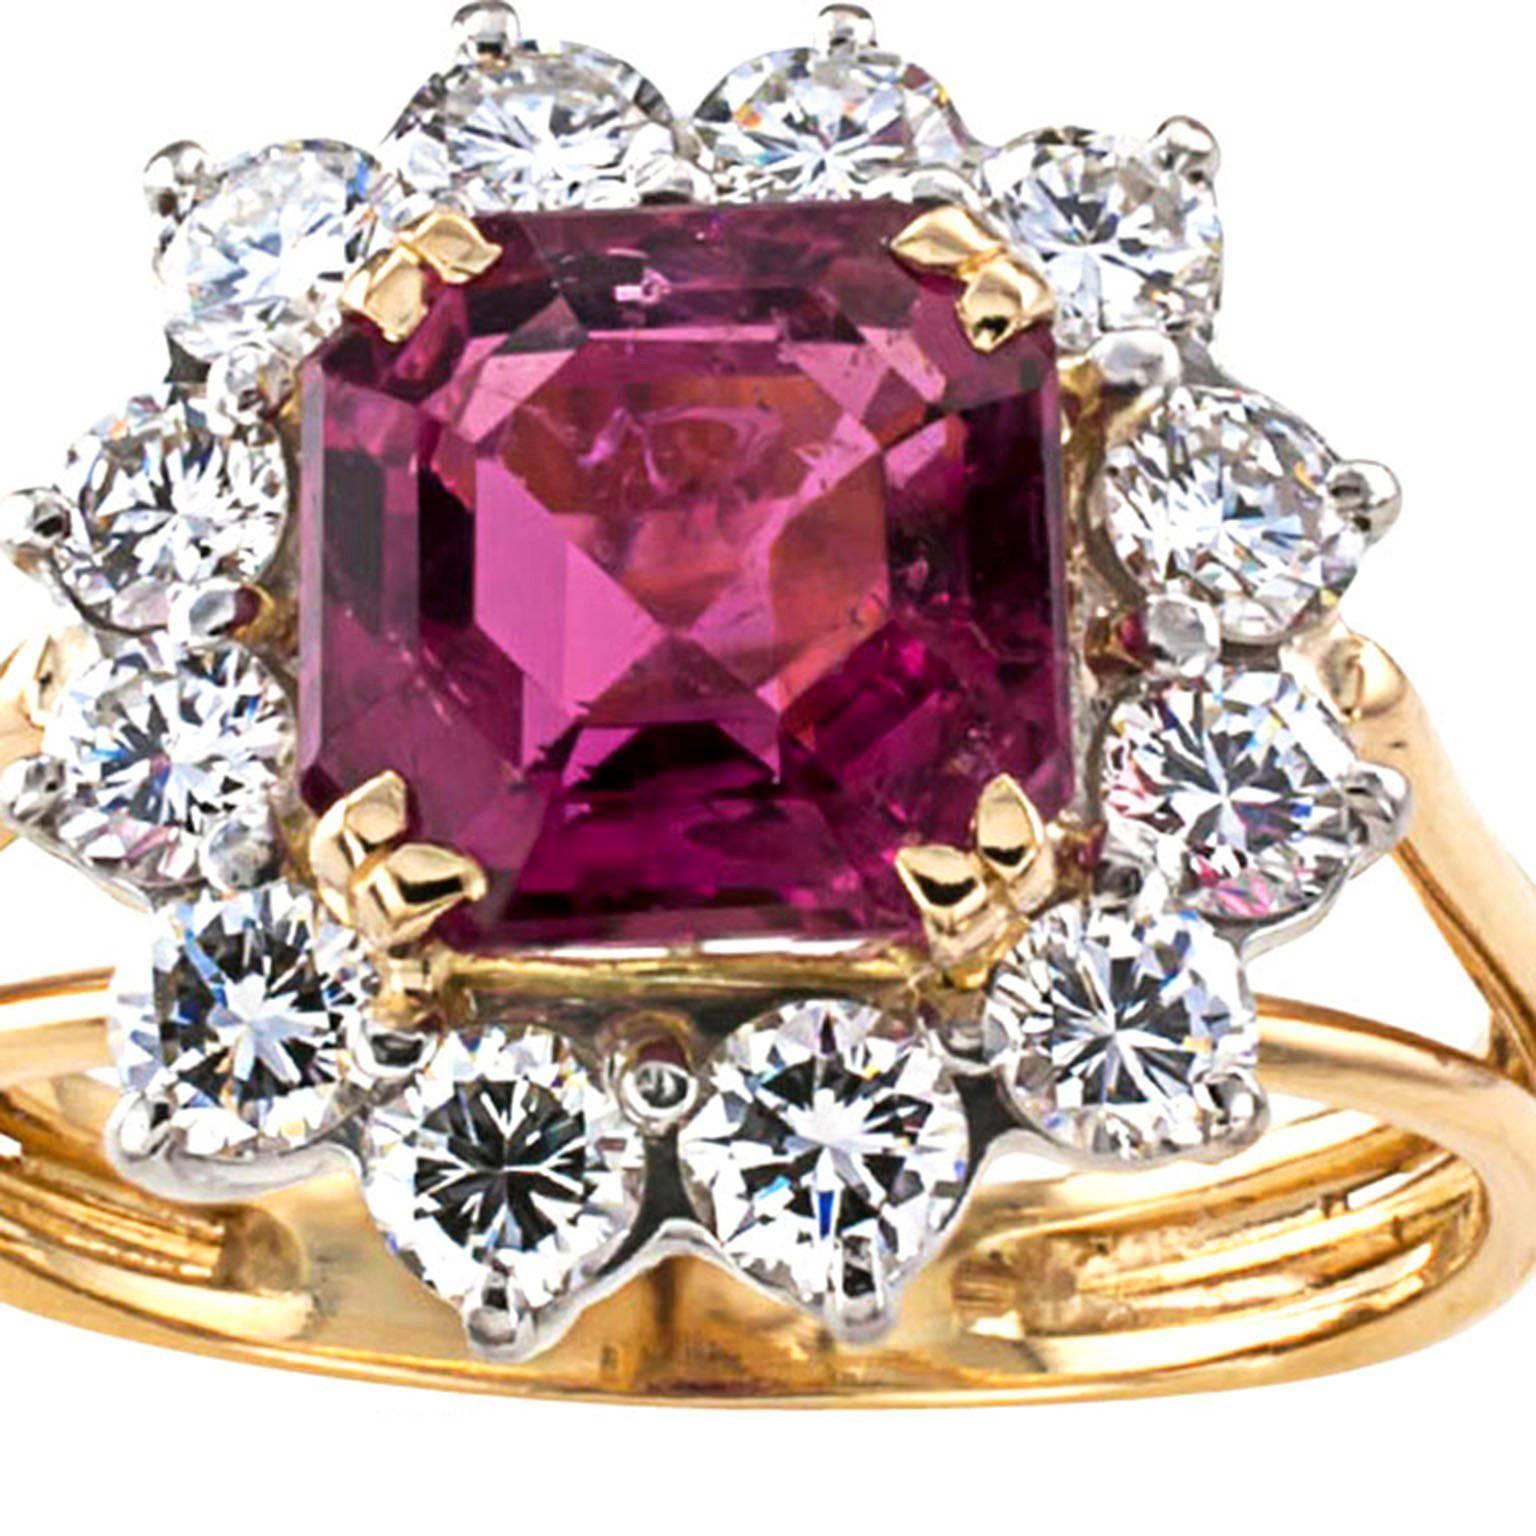 Pink Tourmaline and Diamond Ring

Pink tourmalines have a bewitching quality, tantalizing us with their ethereal shades of color that seem almost too perfect for this world.  Is this the color of ripe raspberries or that of a fine rose wine? 